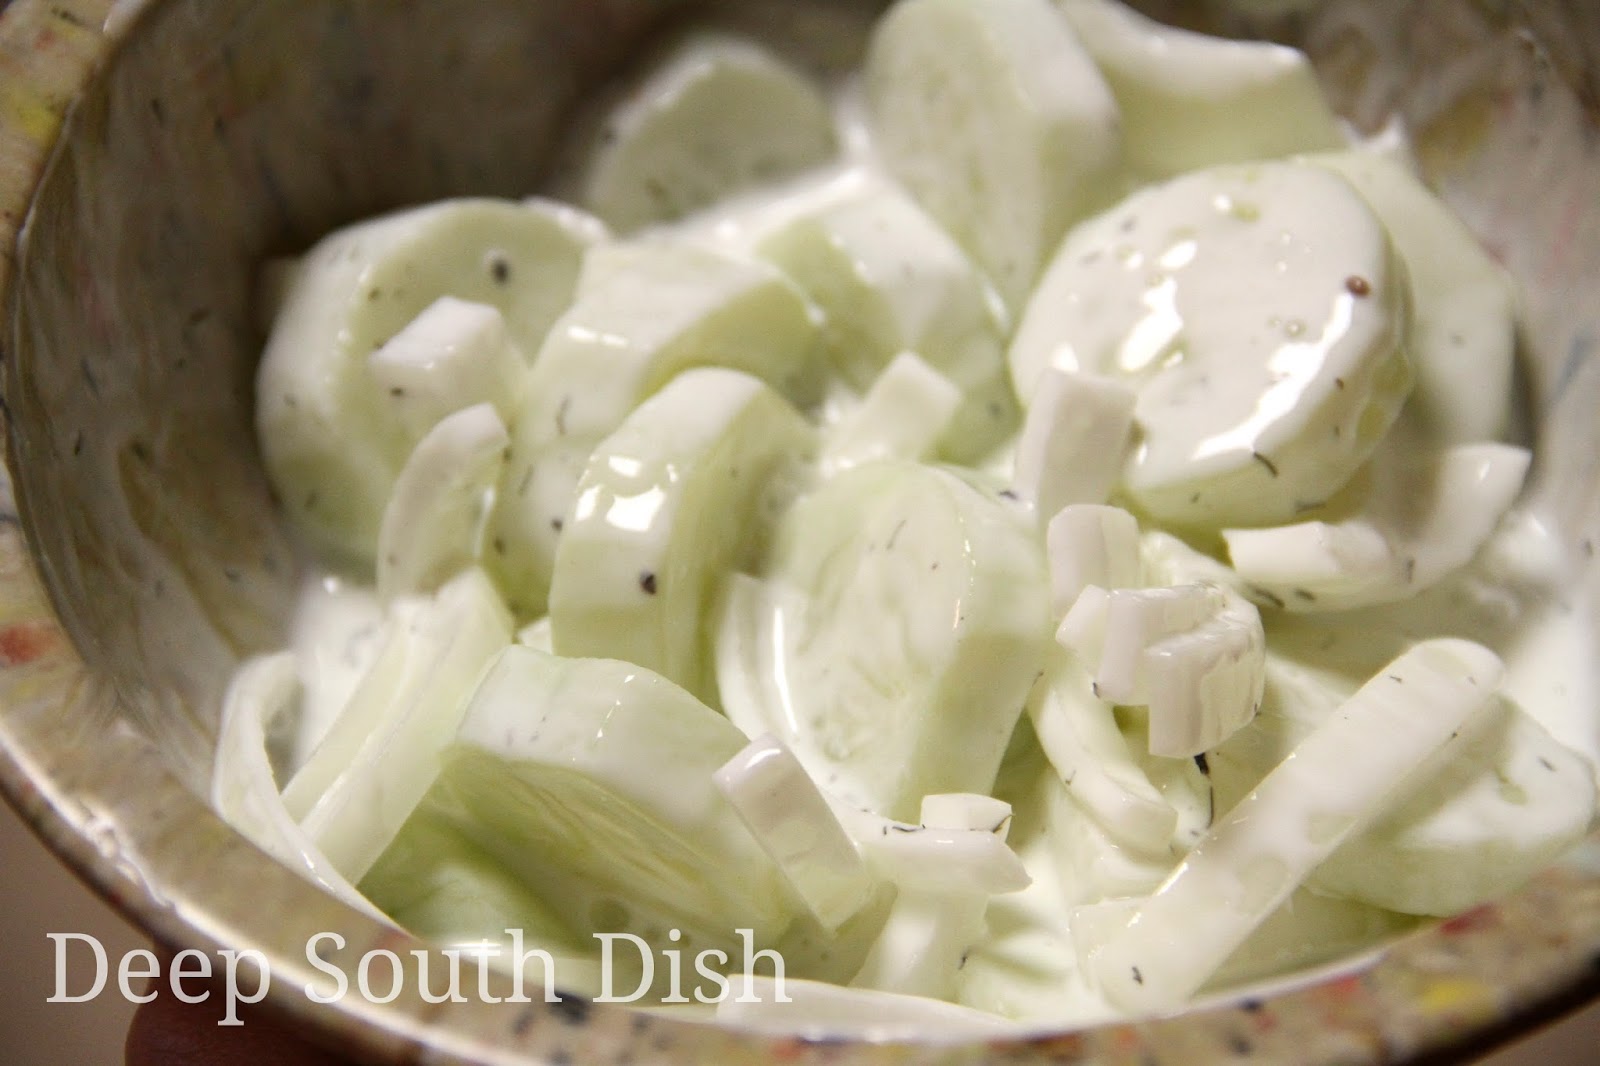 What are some recipes involving cucumber, onions and sour cream?